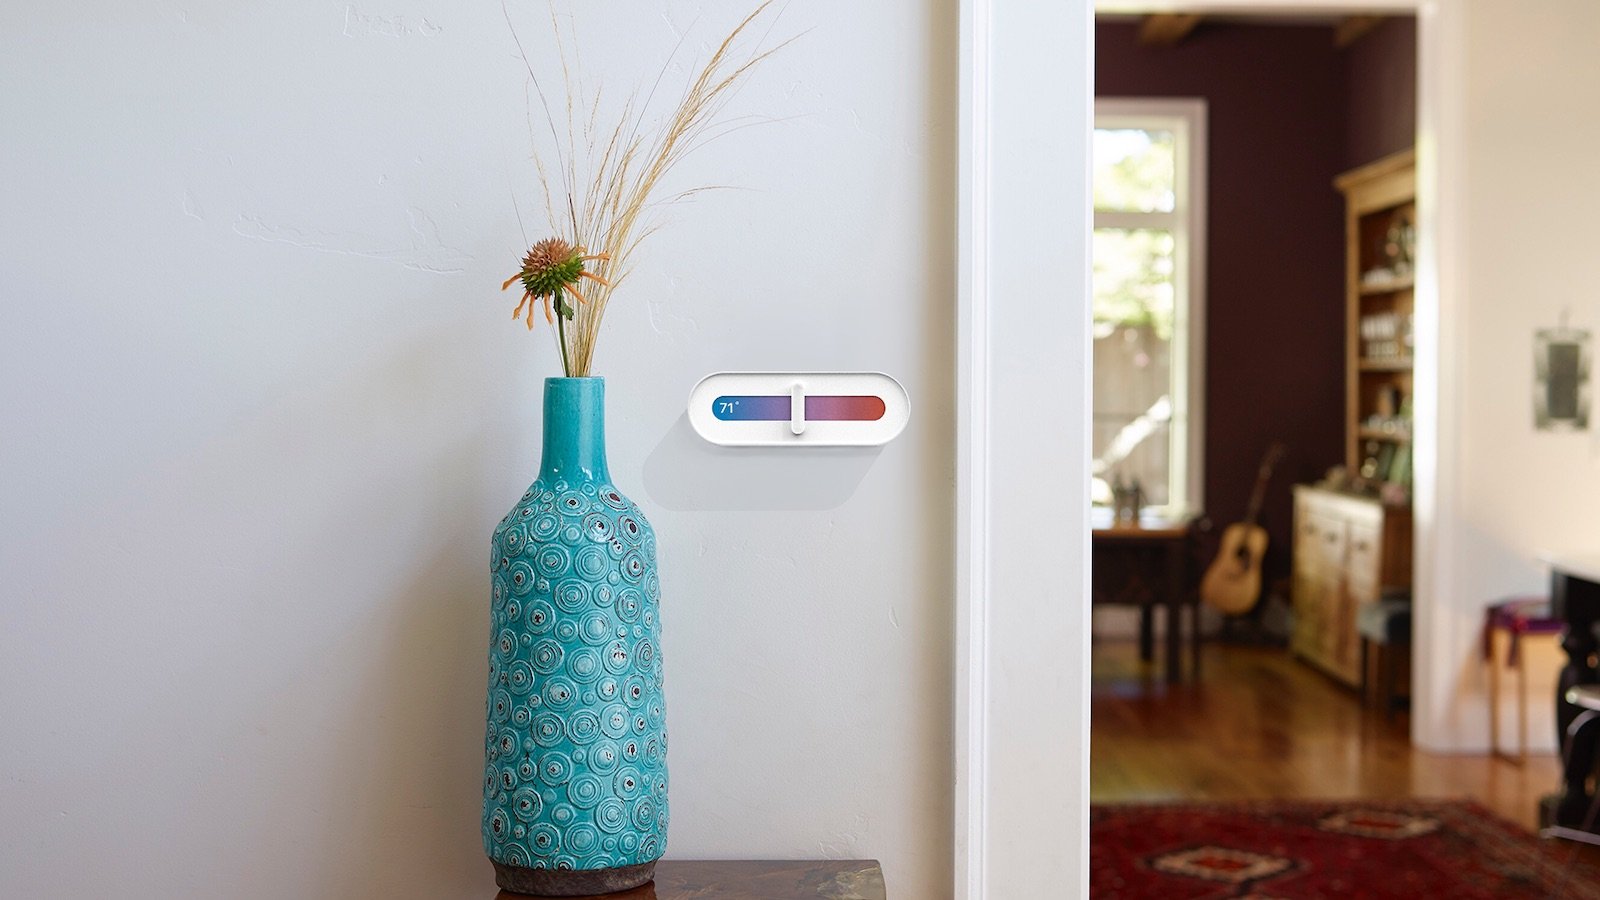 Slide Minimalist Thermostat simplifies managing your home’s temperature